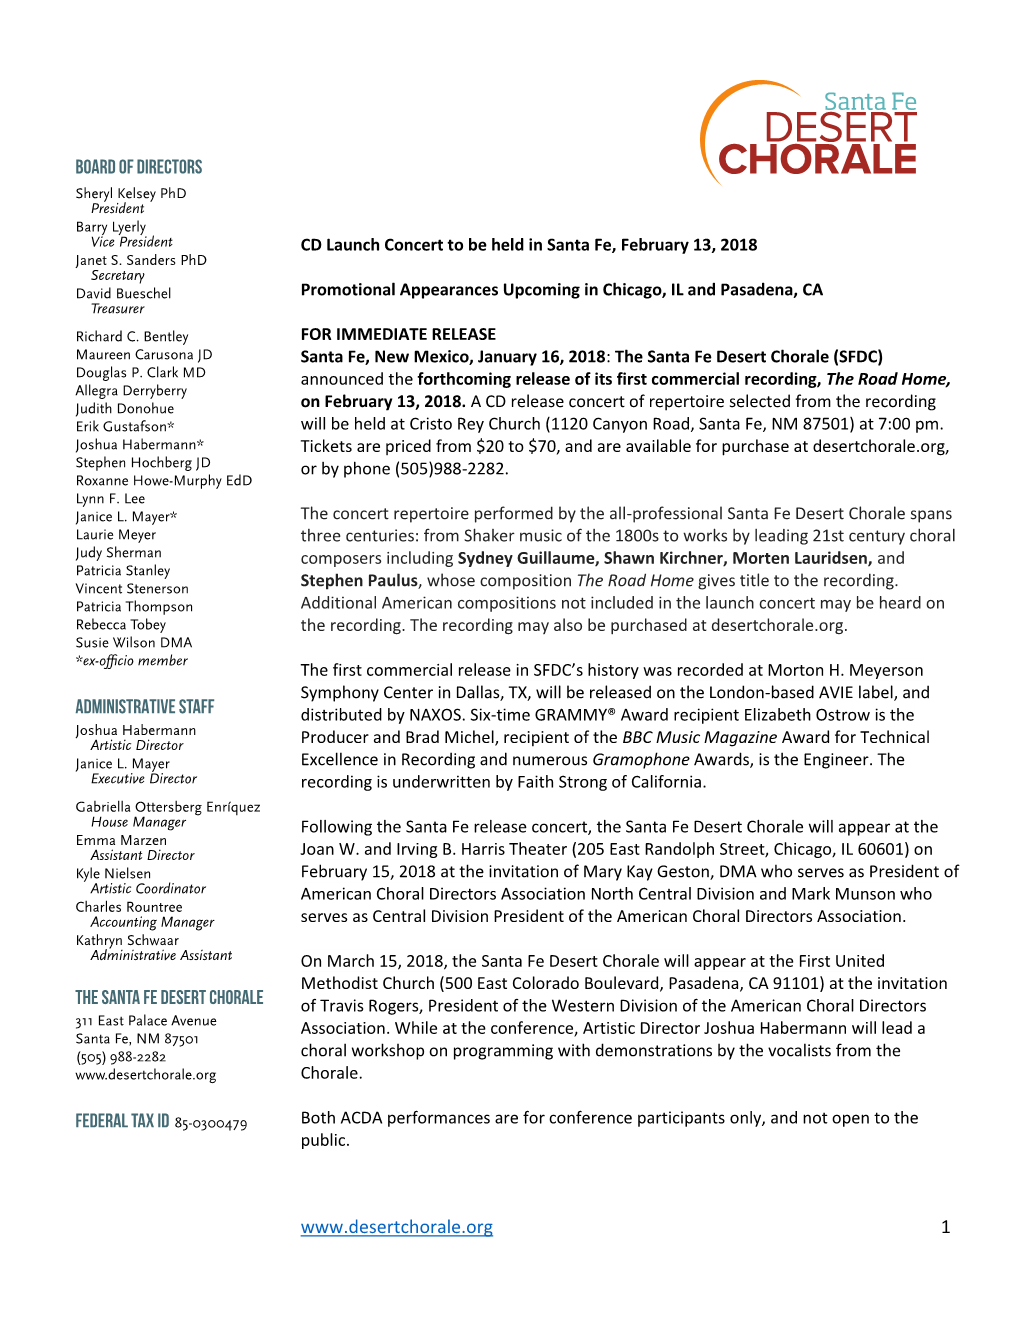 Santa Fe Desert Chorale Announces the Forthcoming Release of Its